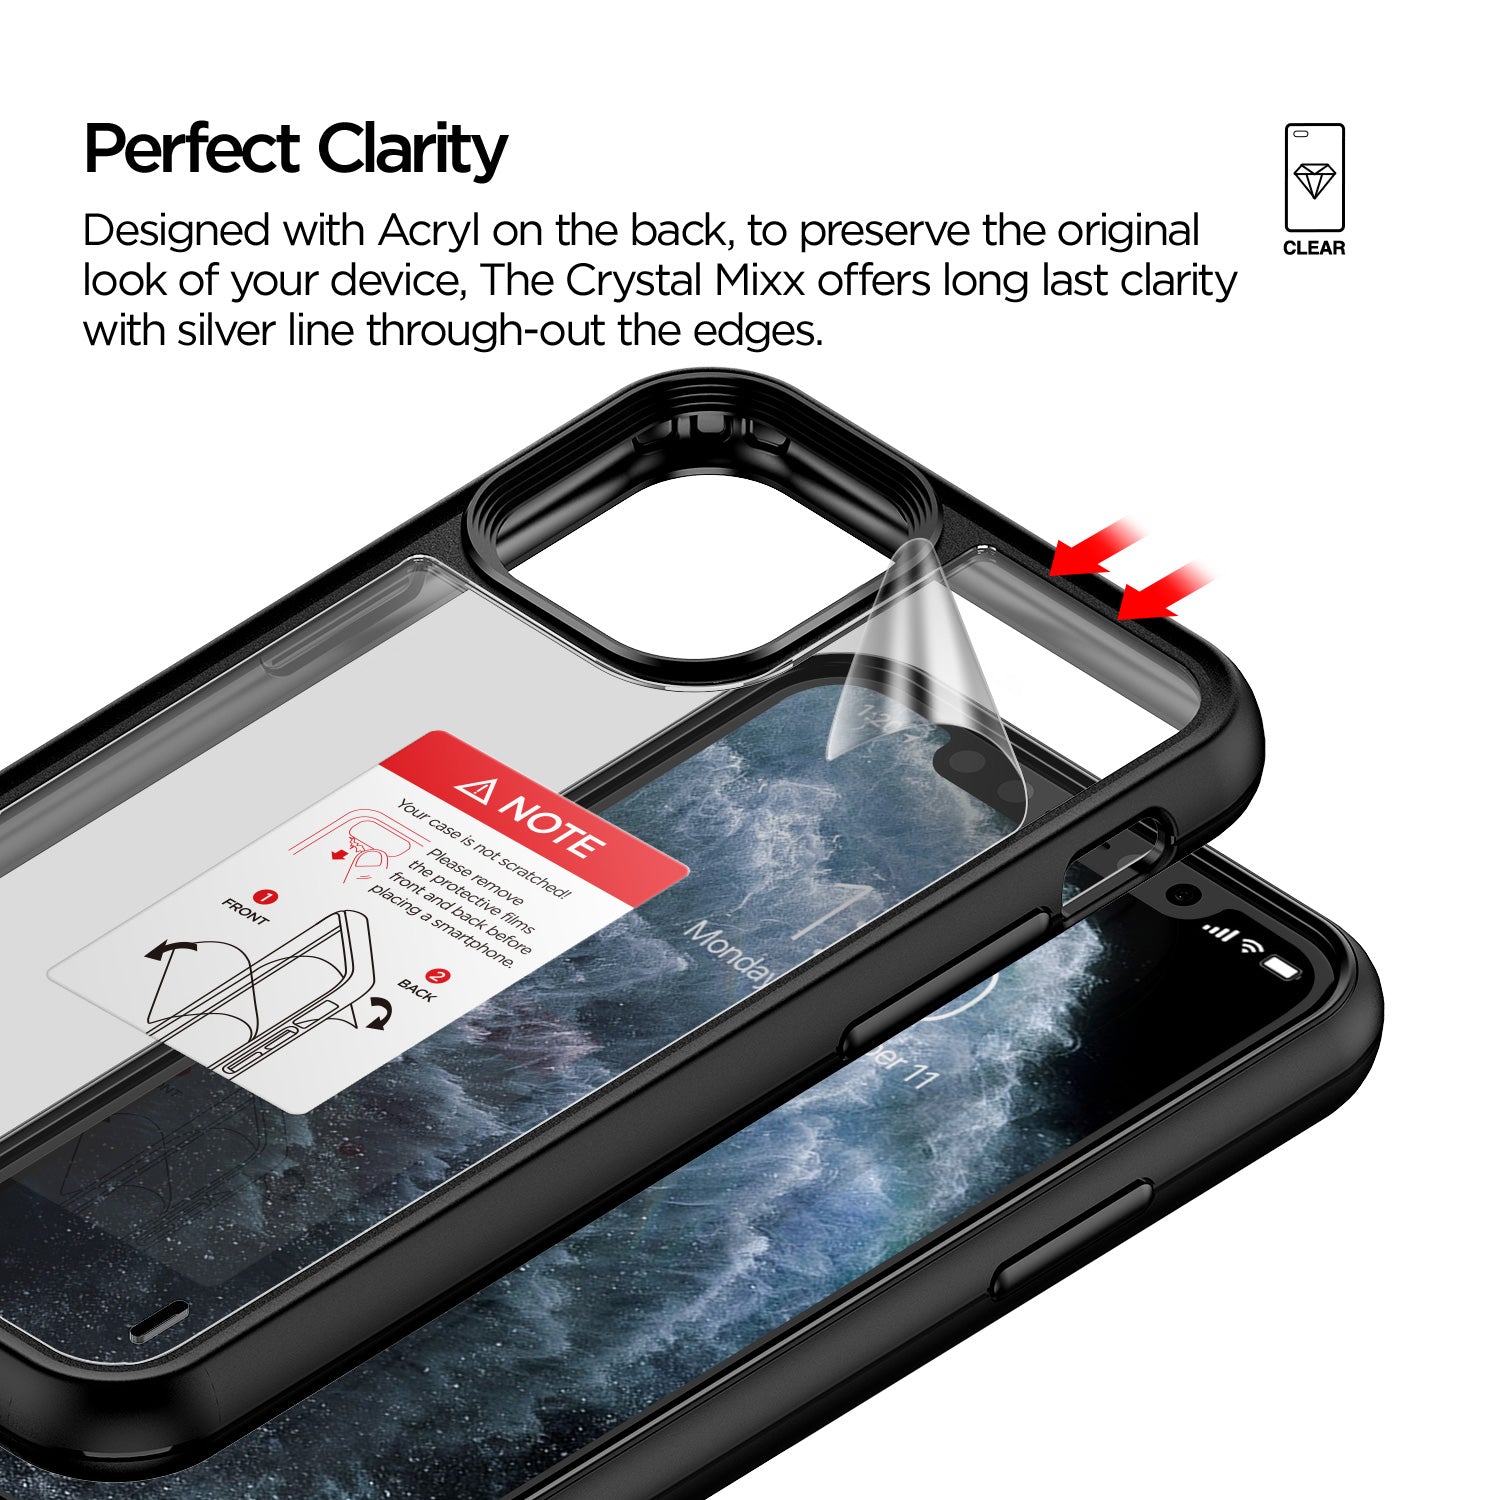 iPhone 11 Pro Max Case Damda Crystal Mixx Clear acrylic body prevent scratches and provide flawless transparent case.